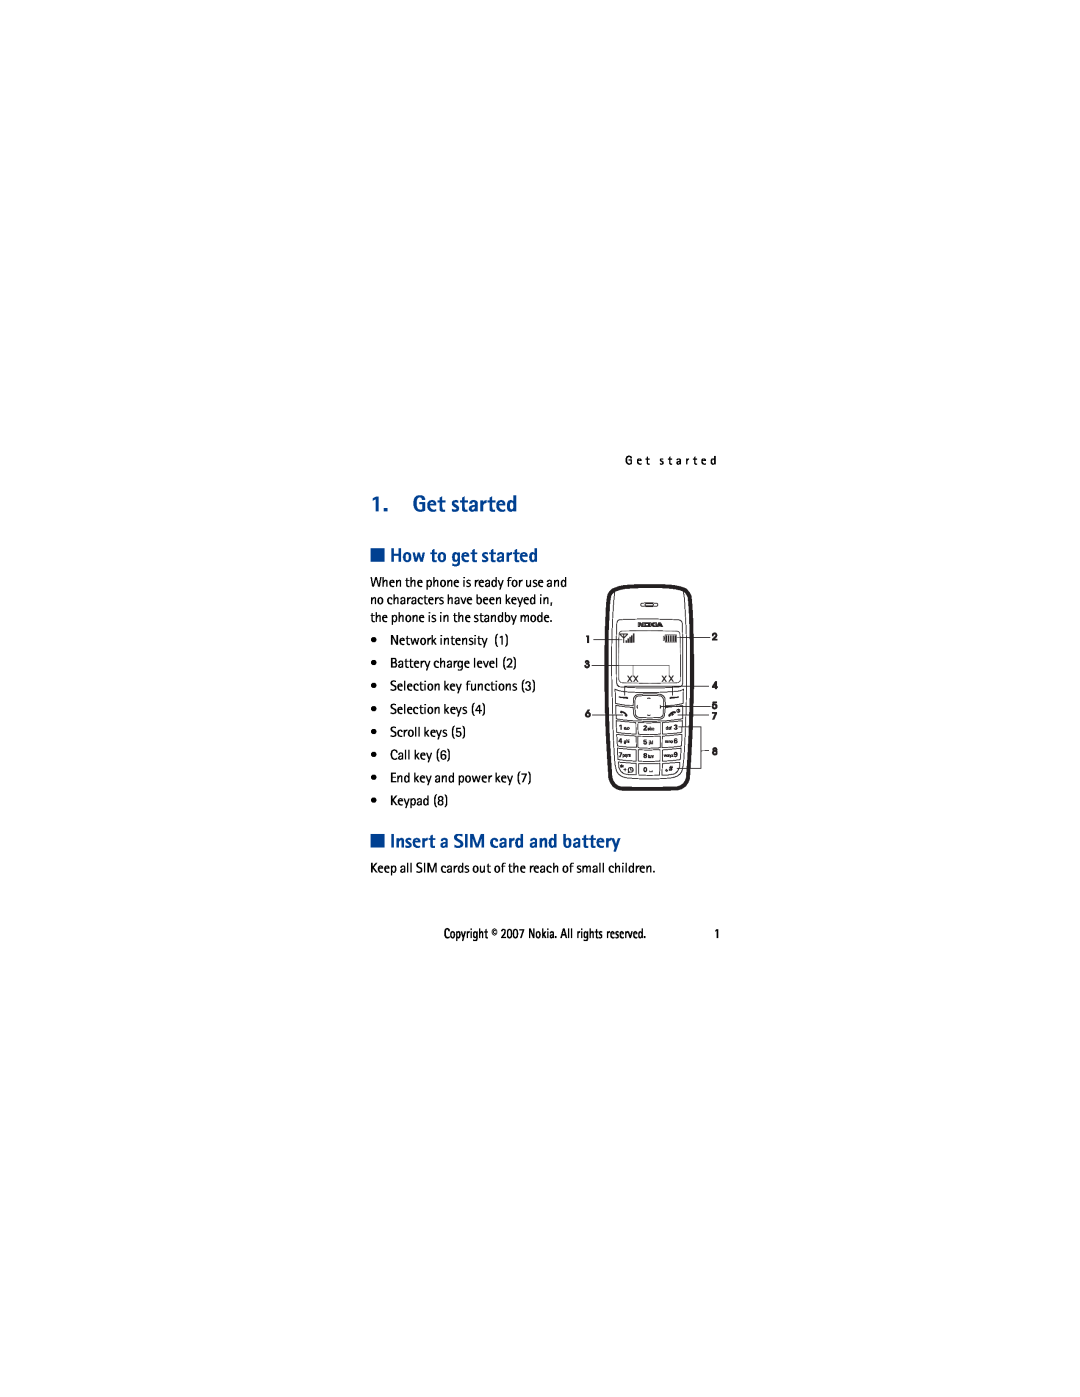 Nokia 1110I manual Get started, How to get started, Insert a SIM card and battery, G e t s t a r t e d 